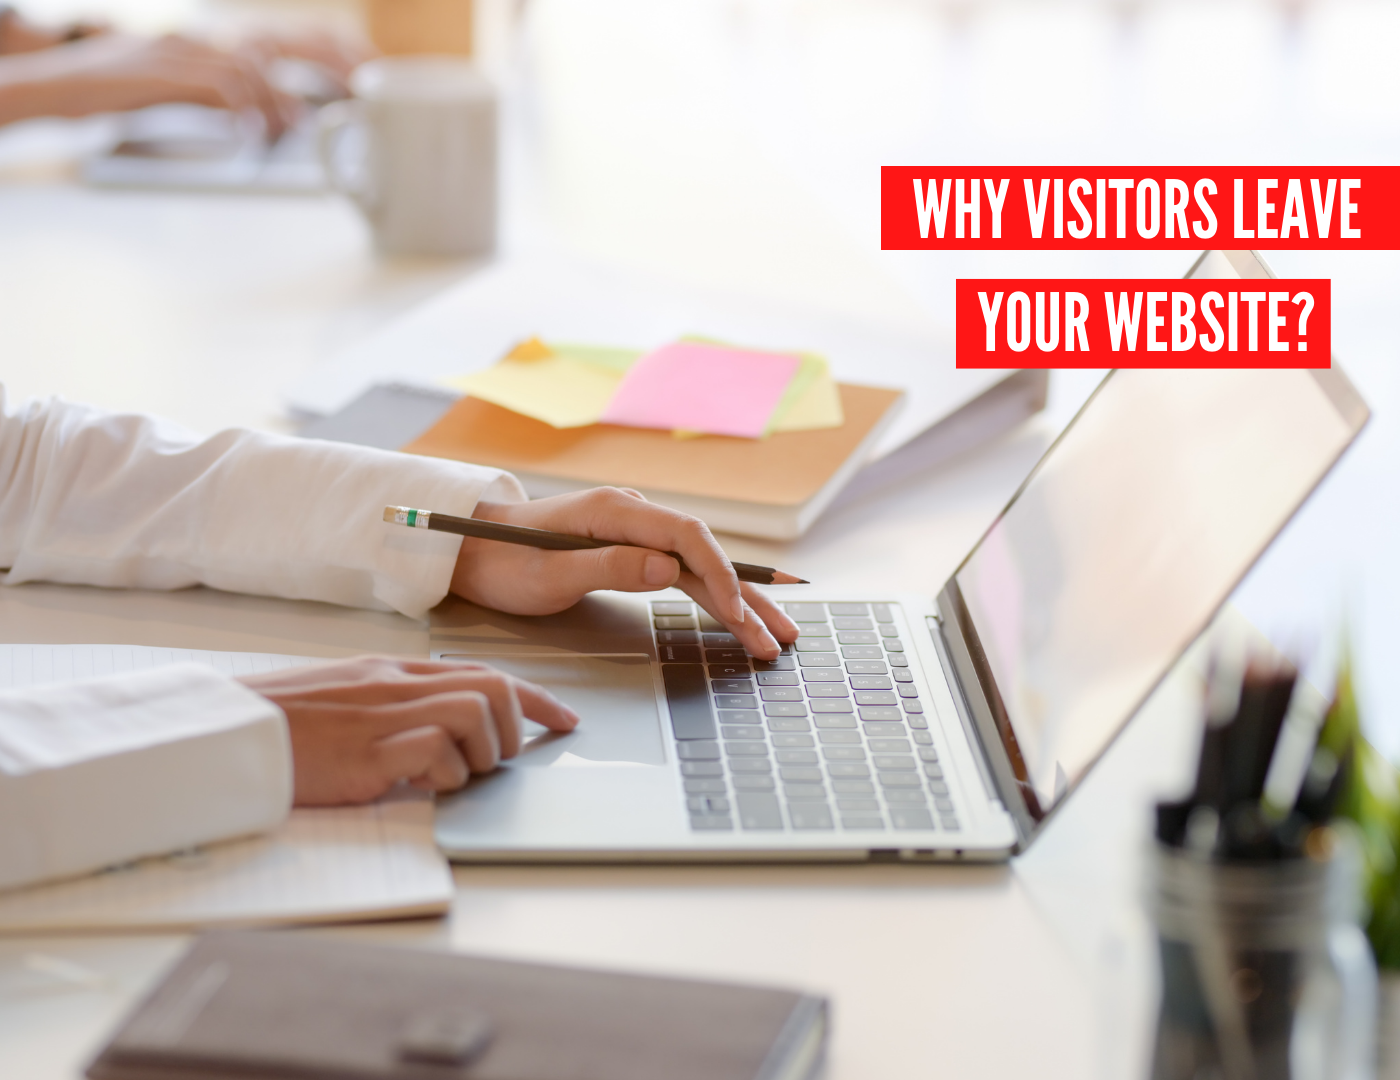 Why Are Visitors to My Website Leaving so Quickly?